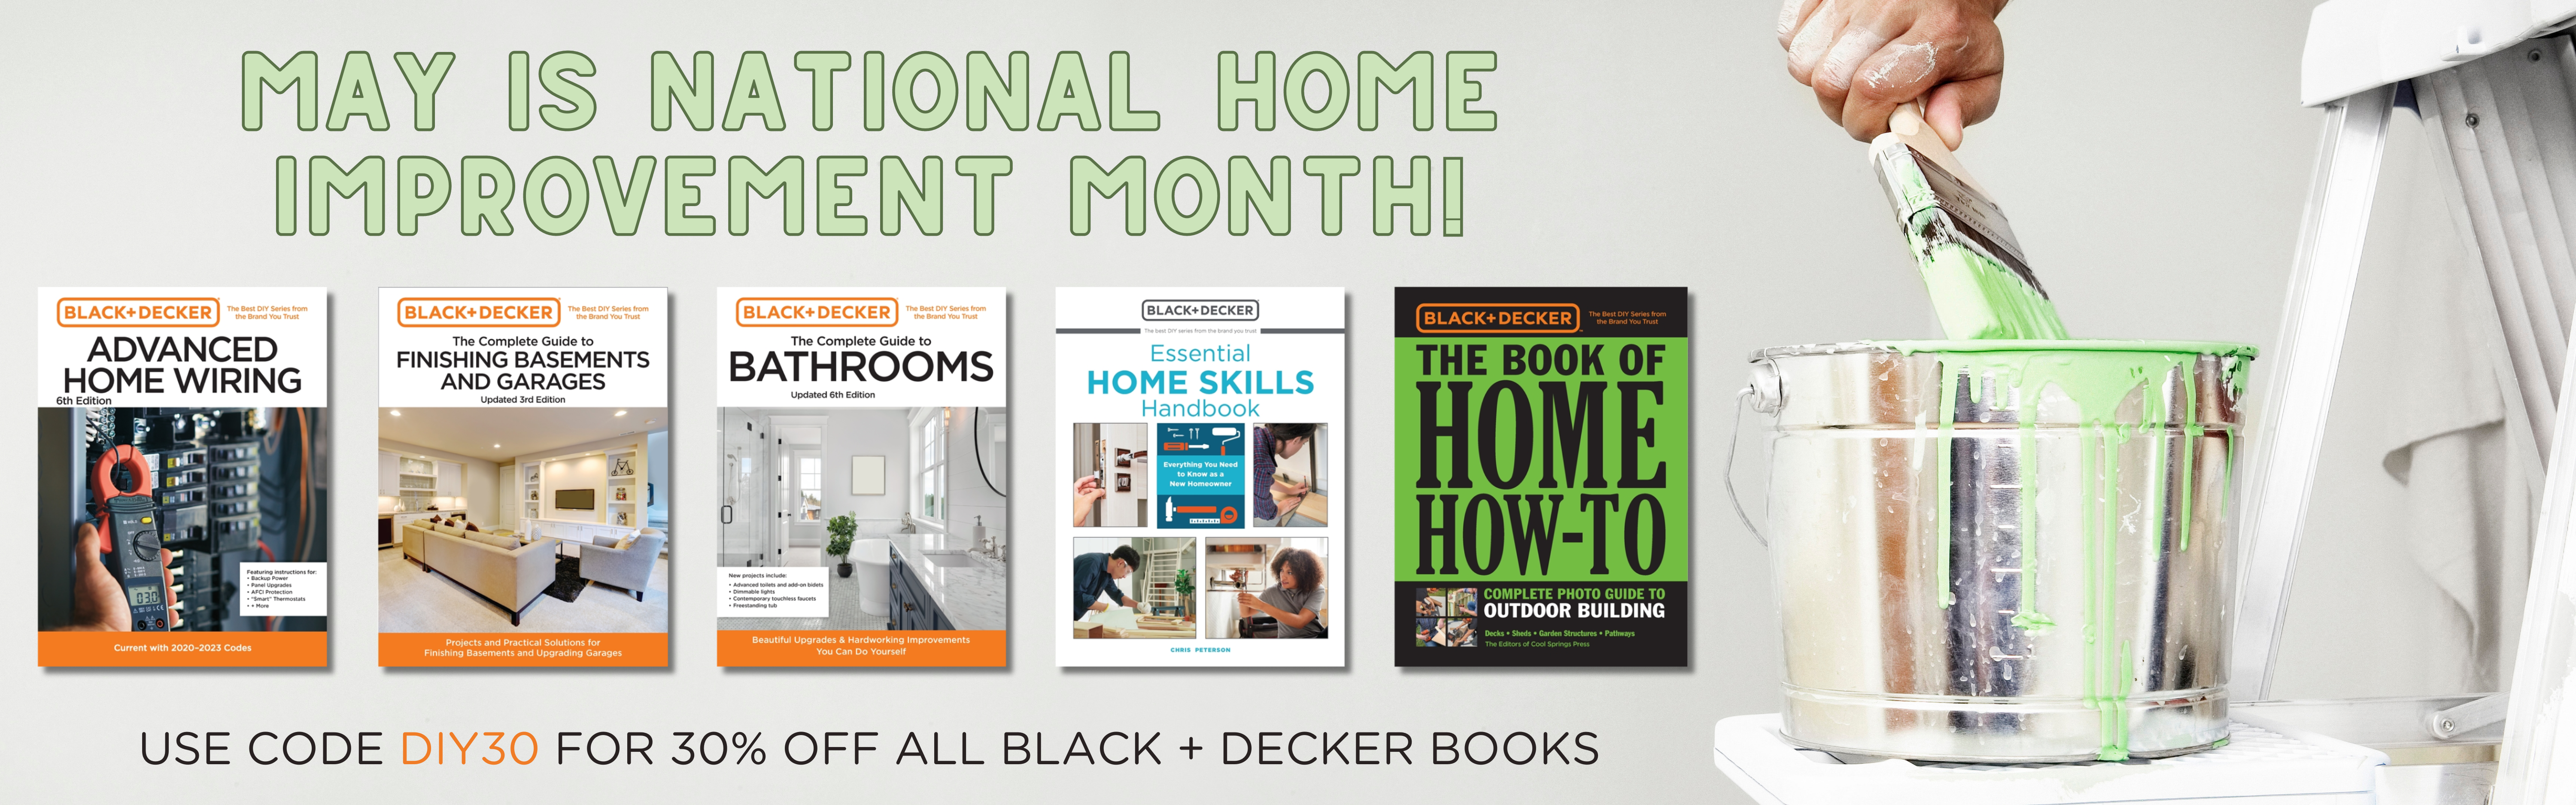 Banner with Black + Decker titles for National Home Improvement Month